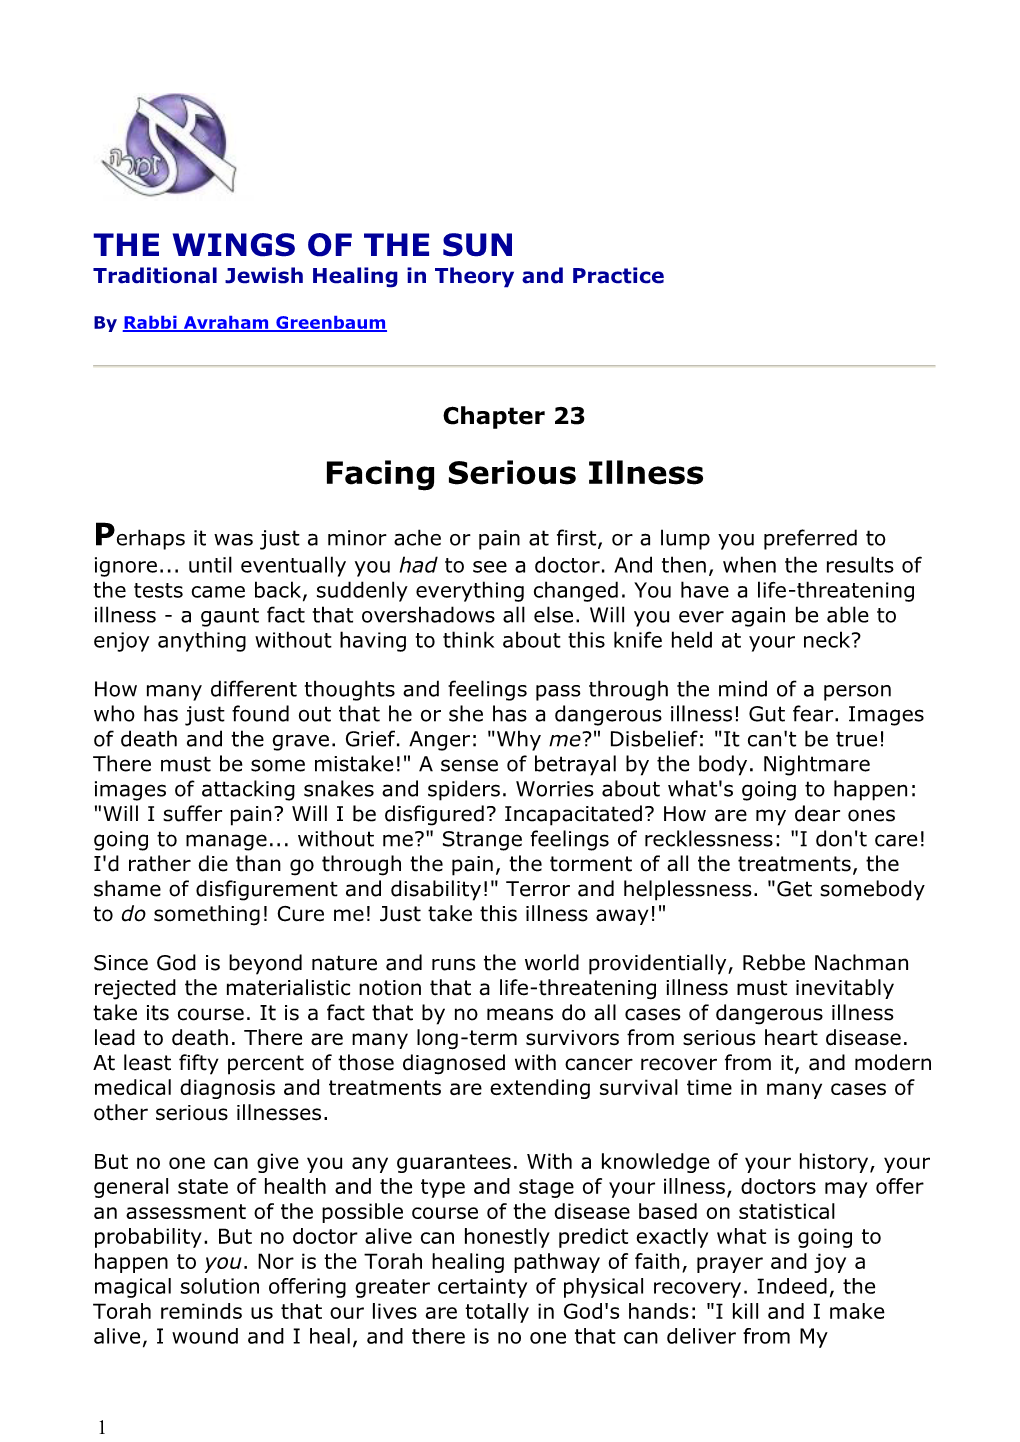 THE WINGS of the SUN Facing Serious Illness